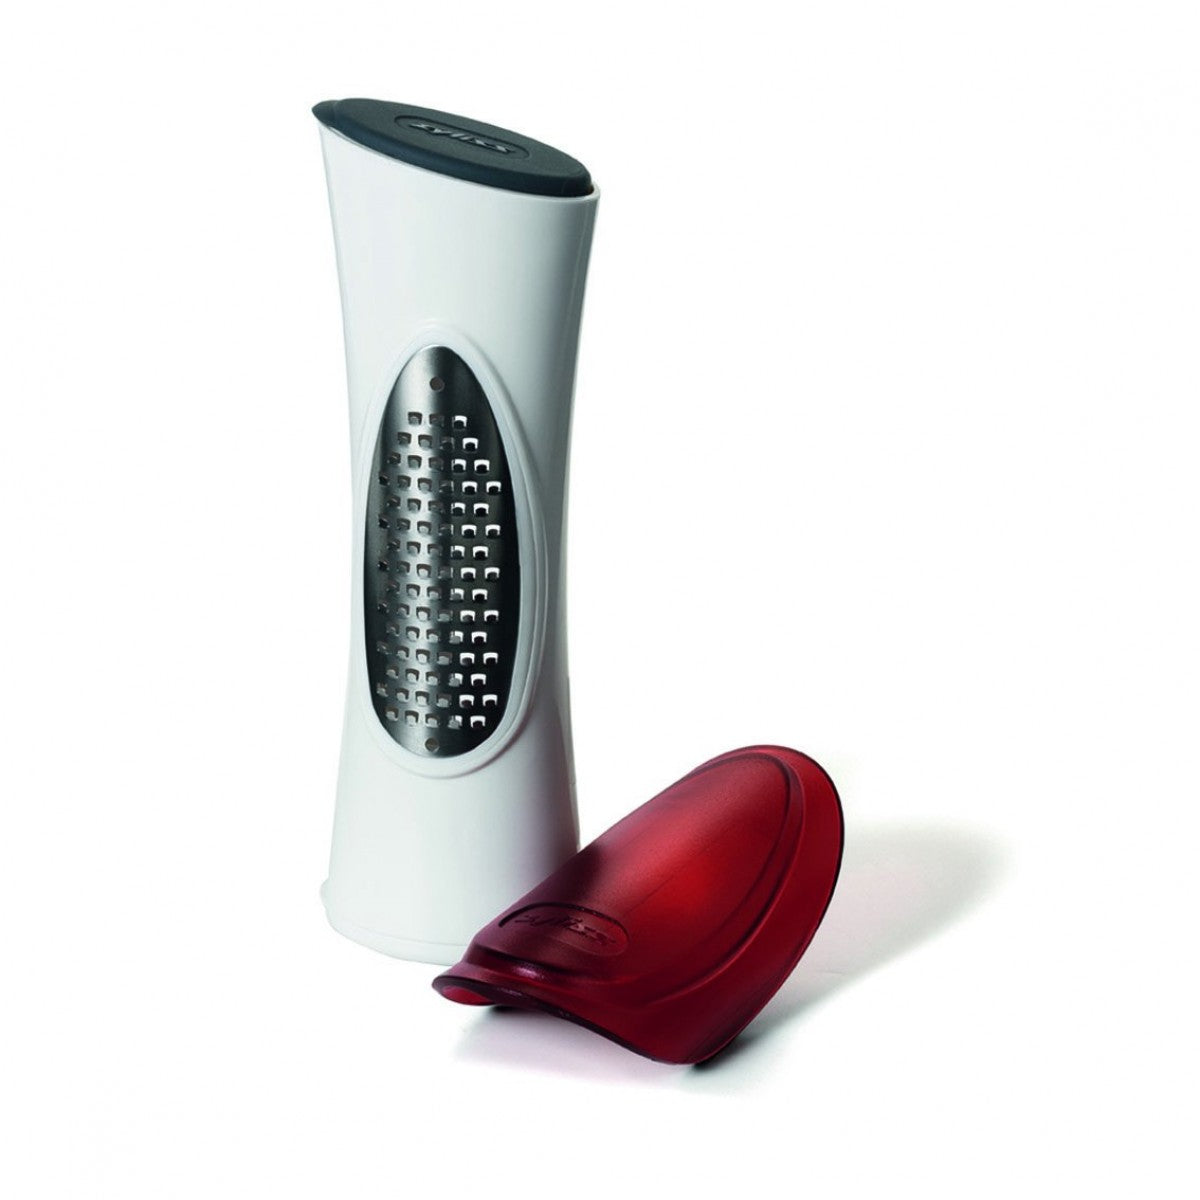 Zyliss cheese grater NIB Swiss quality - general for sale - by